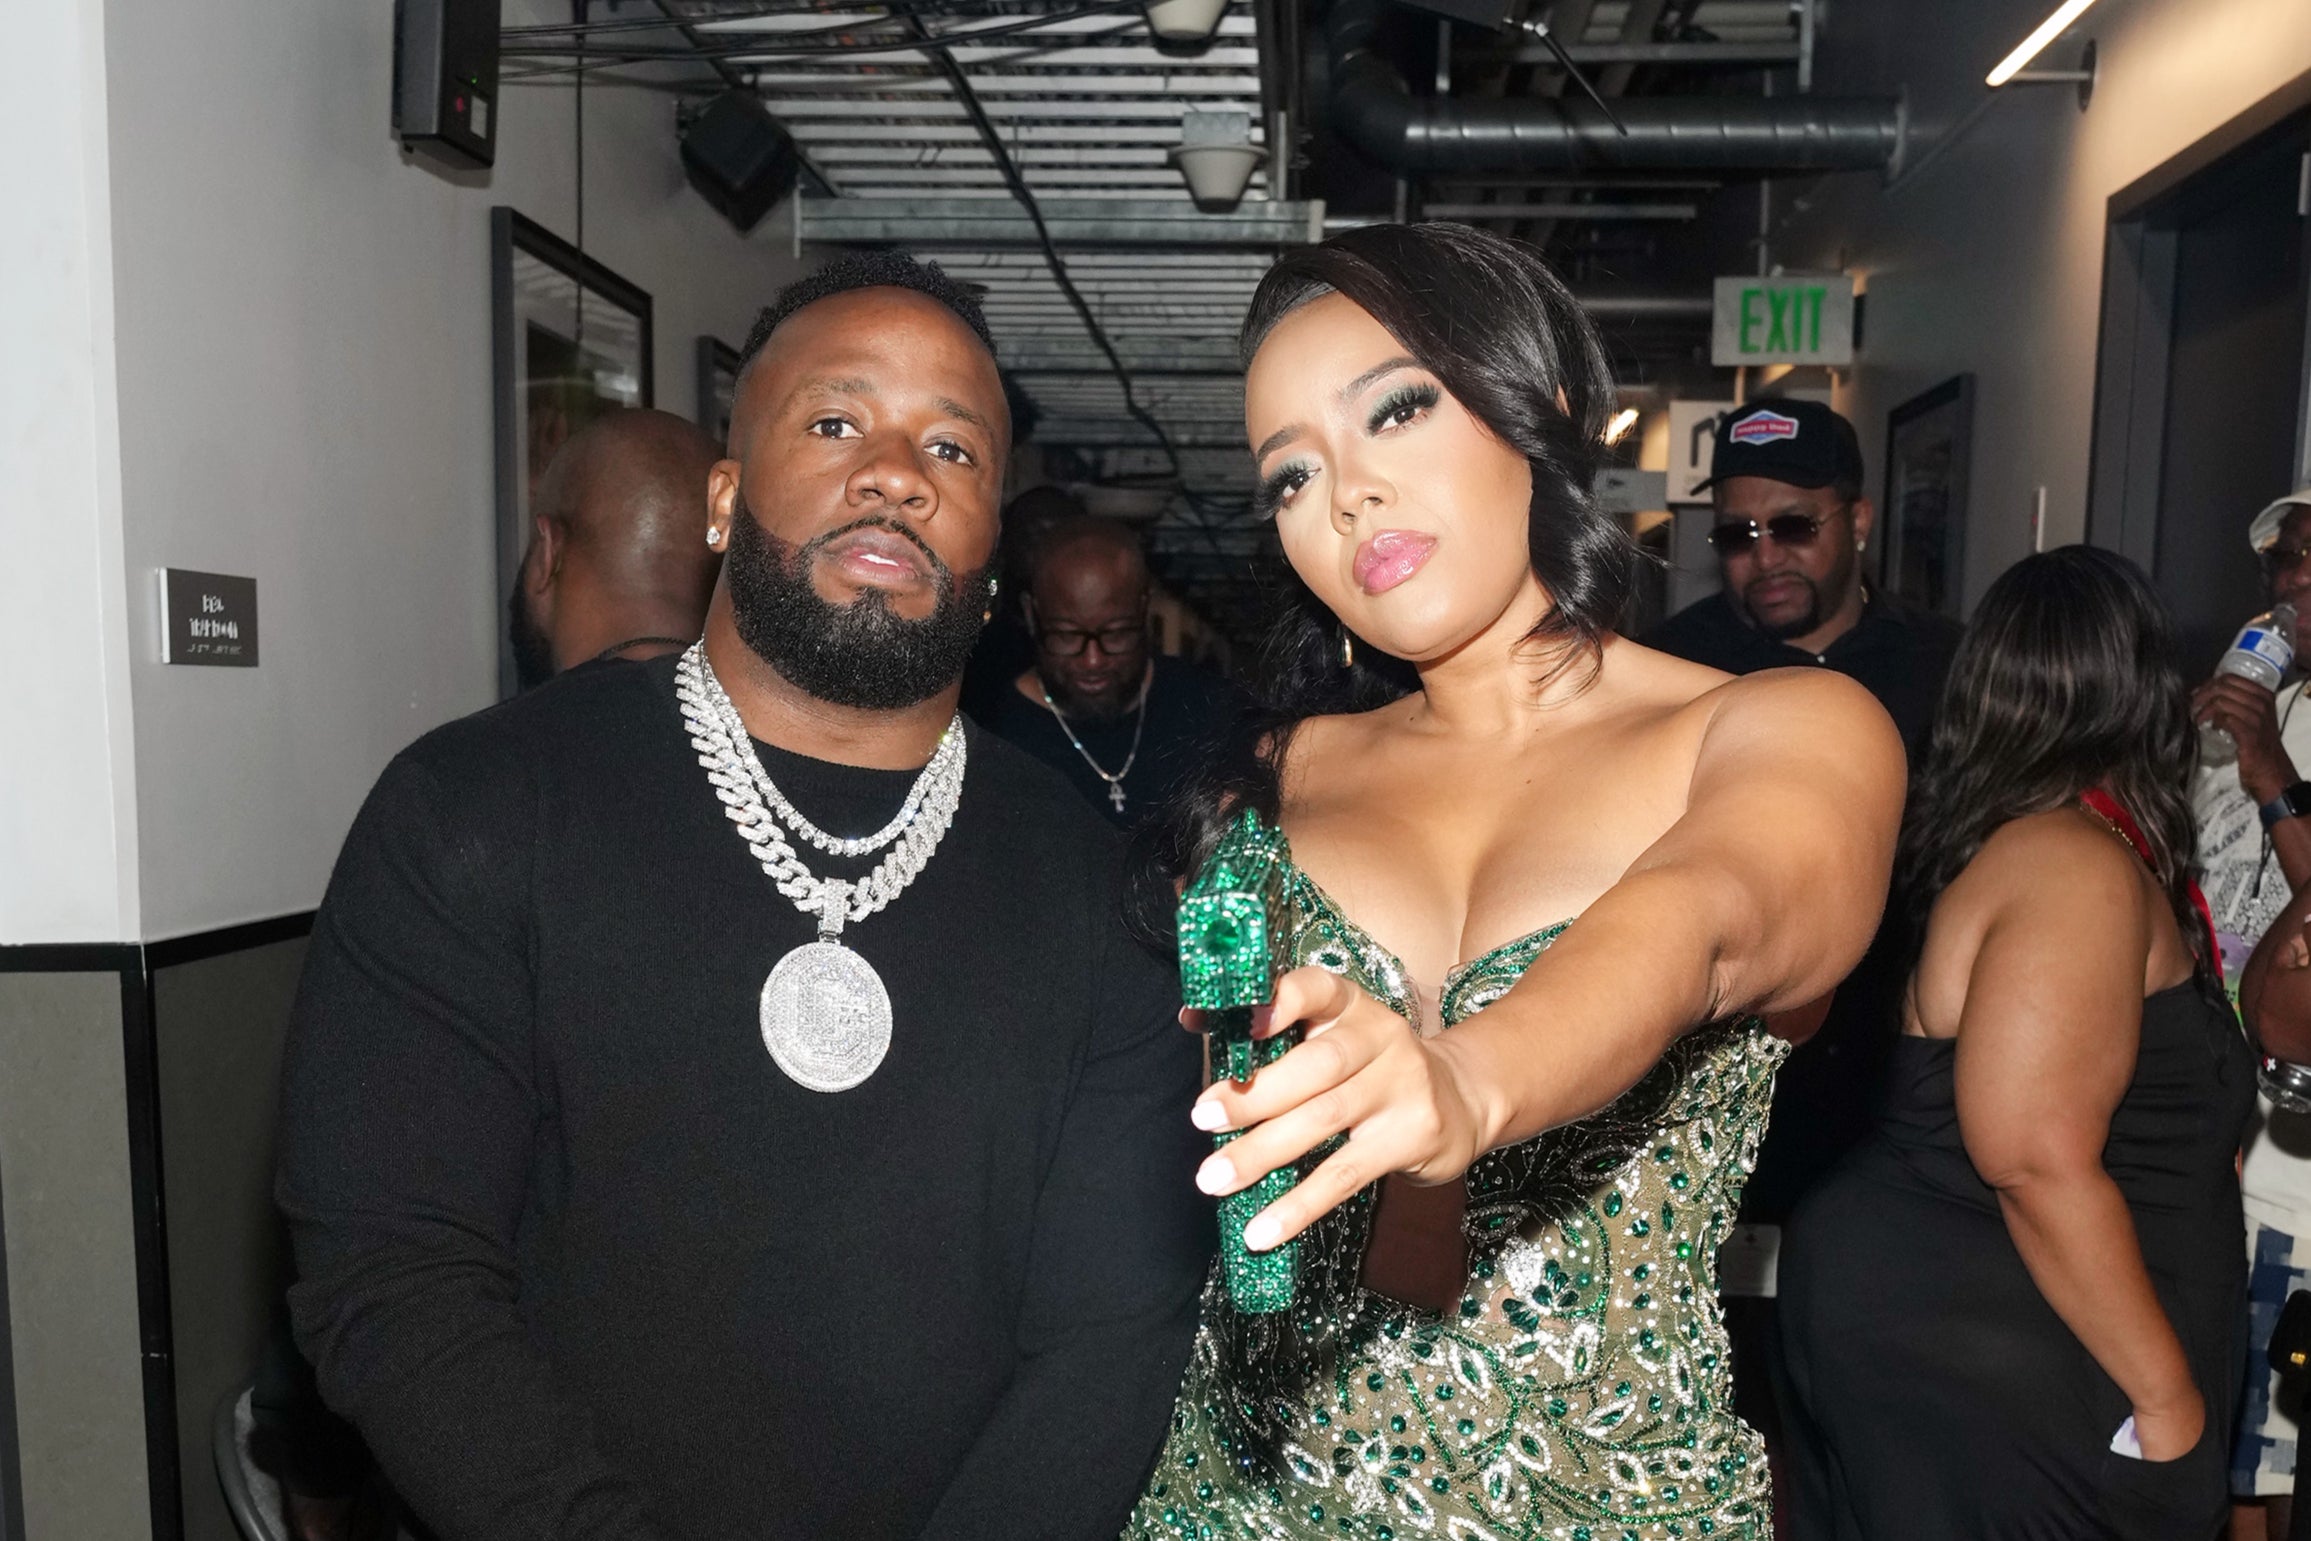 Simmons posing with her purse and boyfriend, rapper Yo Gotti, at the BET awards